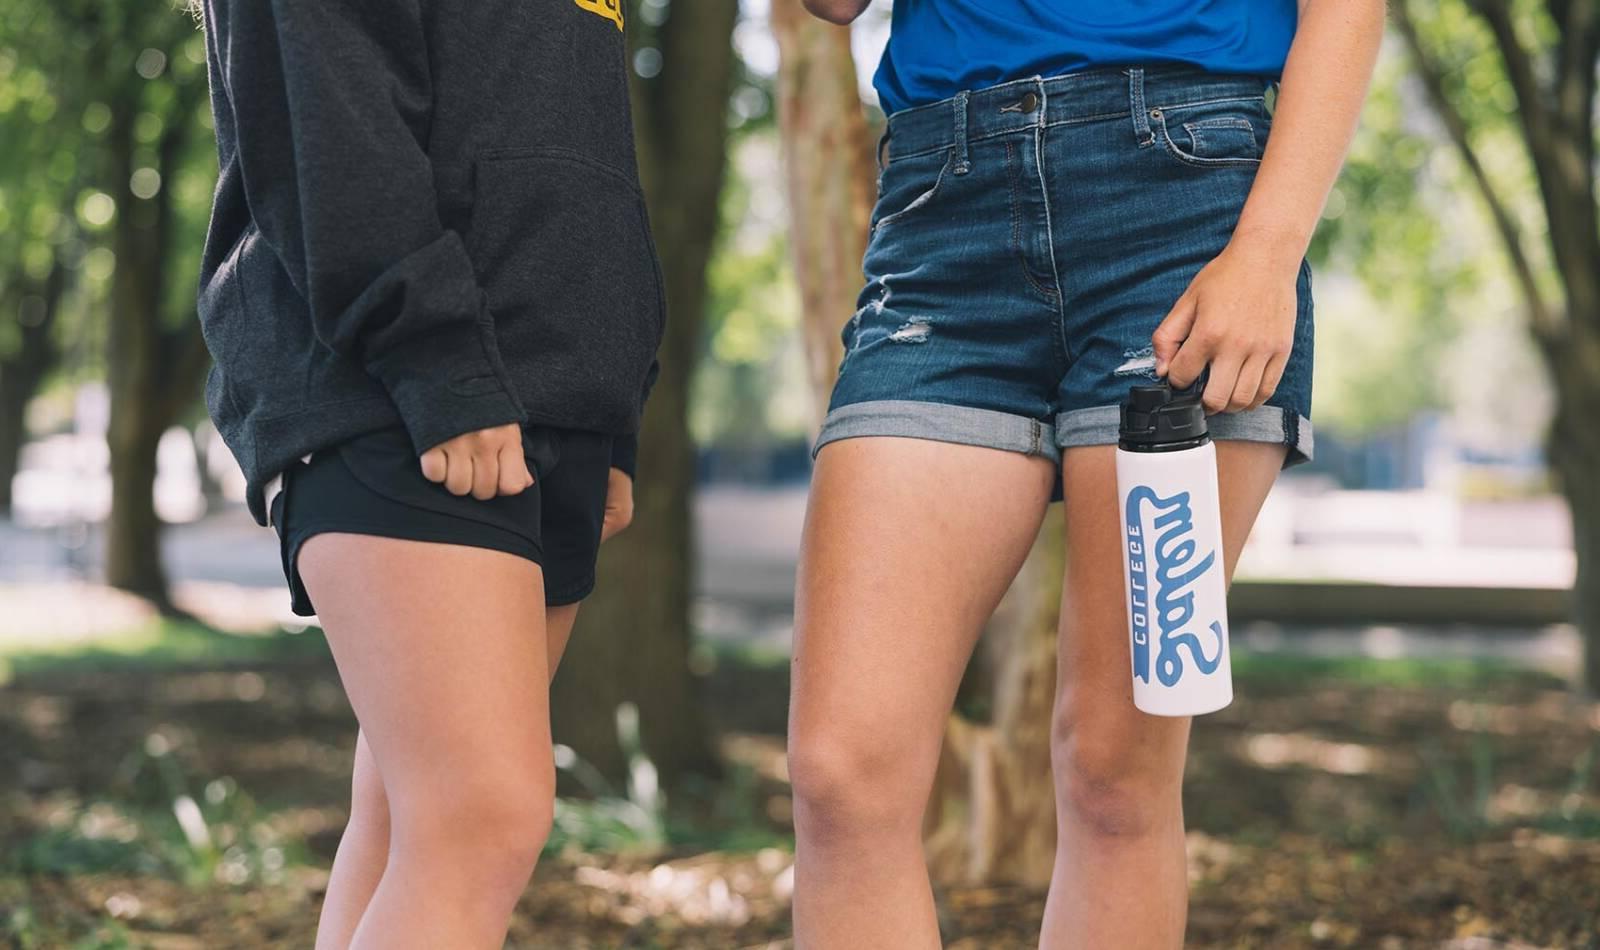 Photo of Salem College students legs with one student holding a water bottle